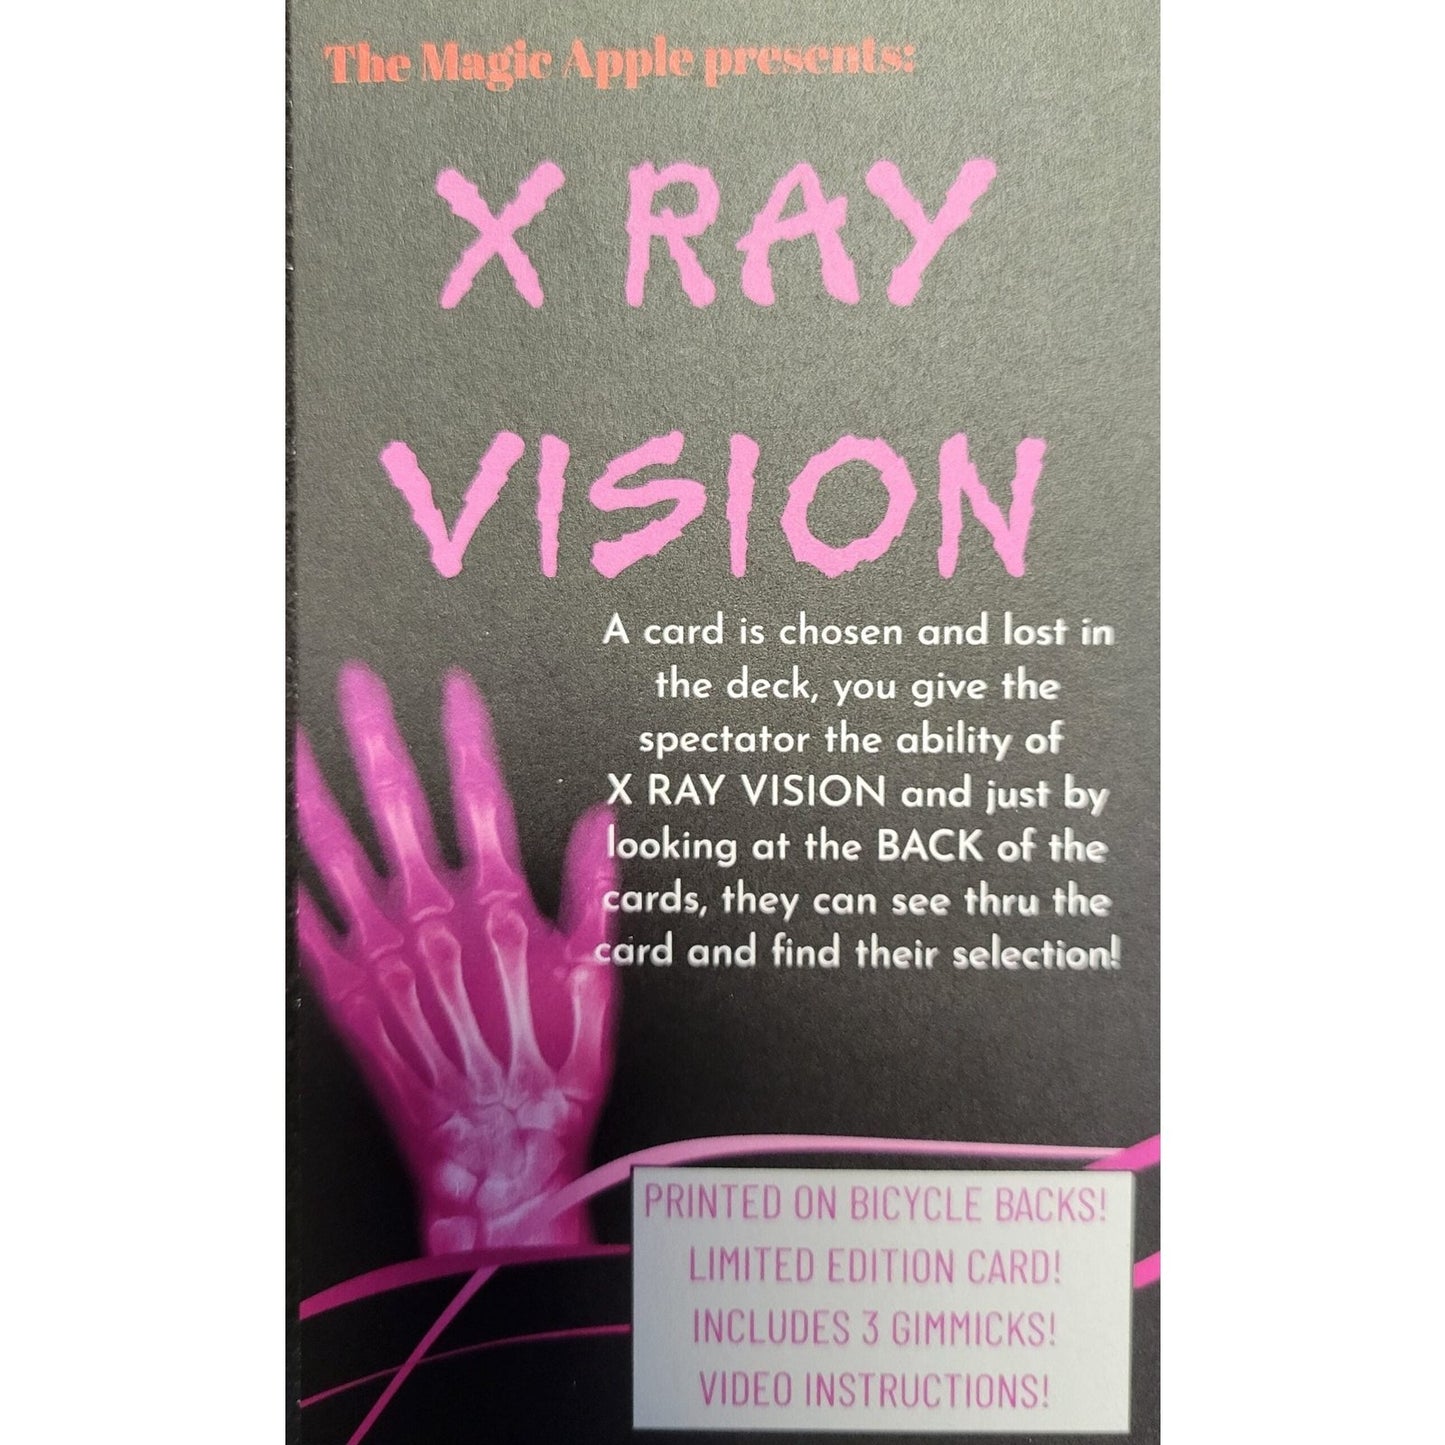 X Ray Vision by Jeff Ezell and The Magic Apple